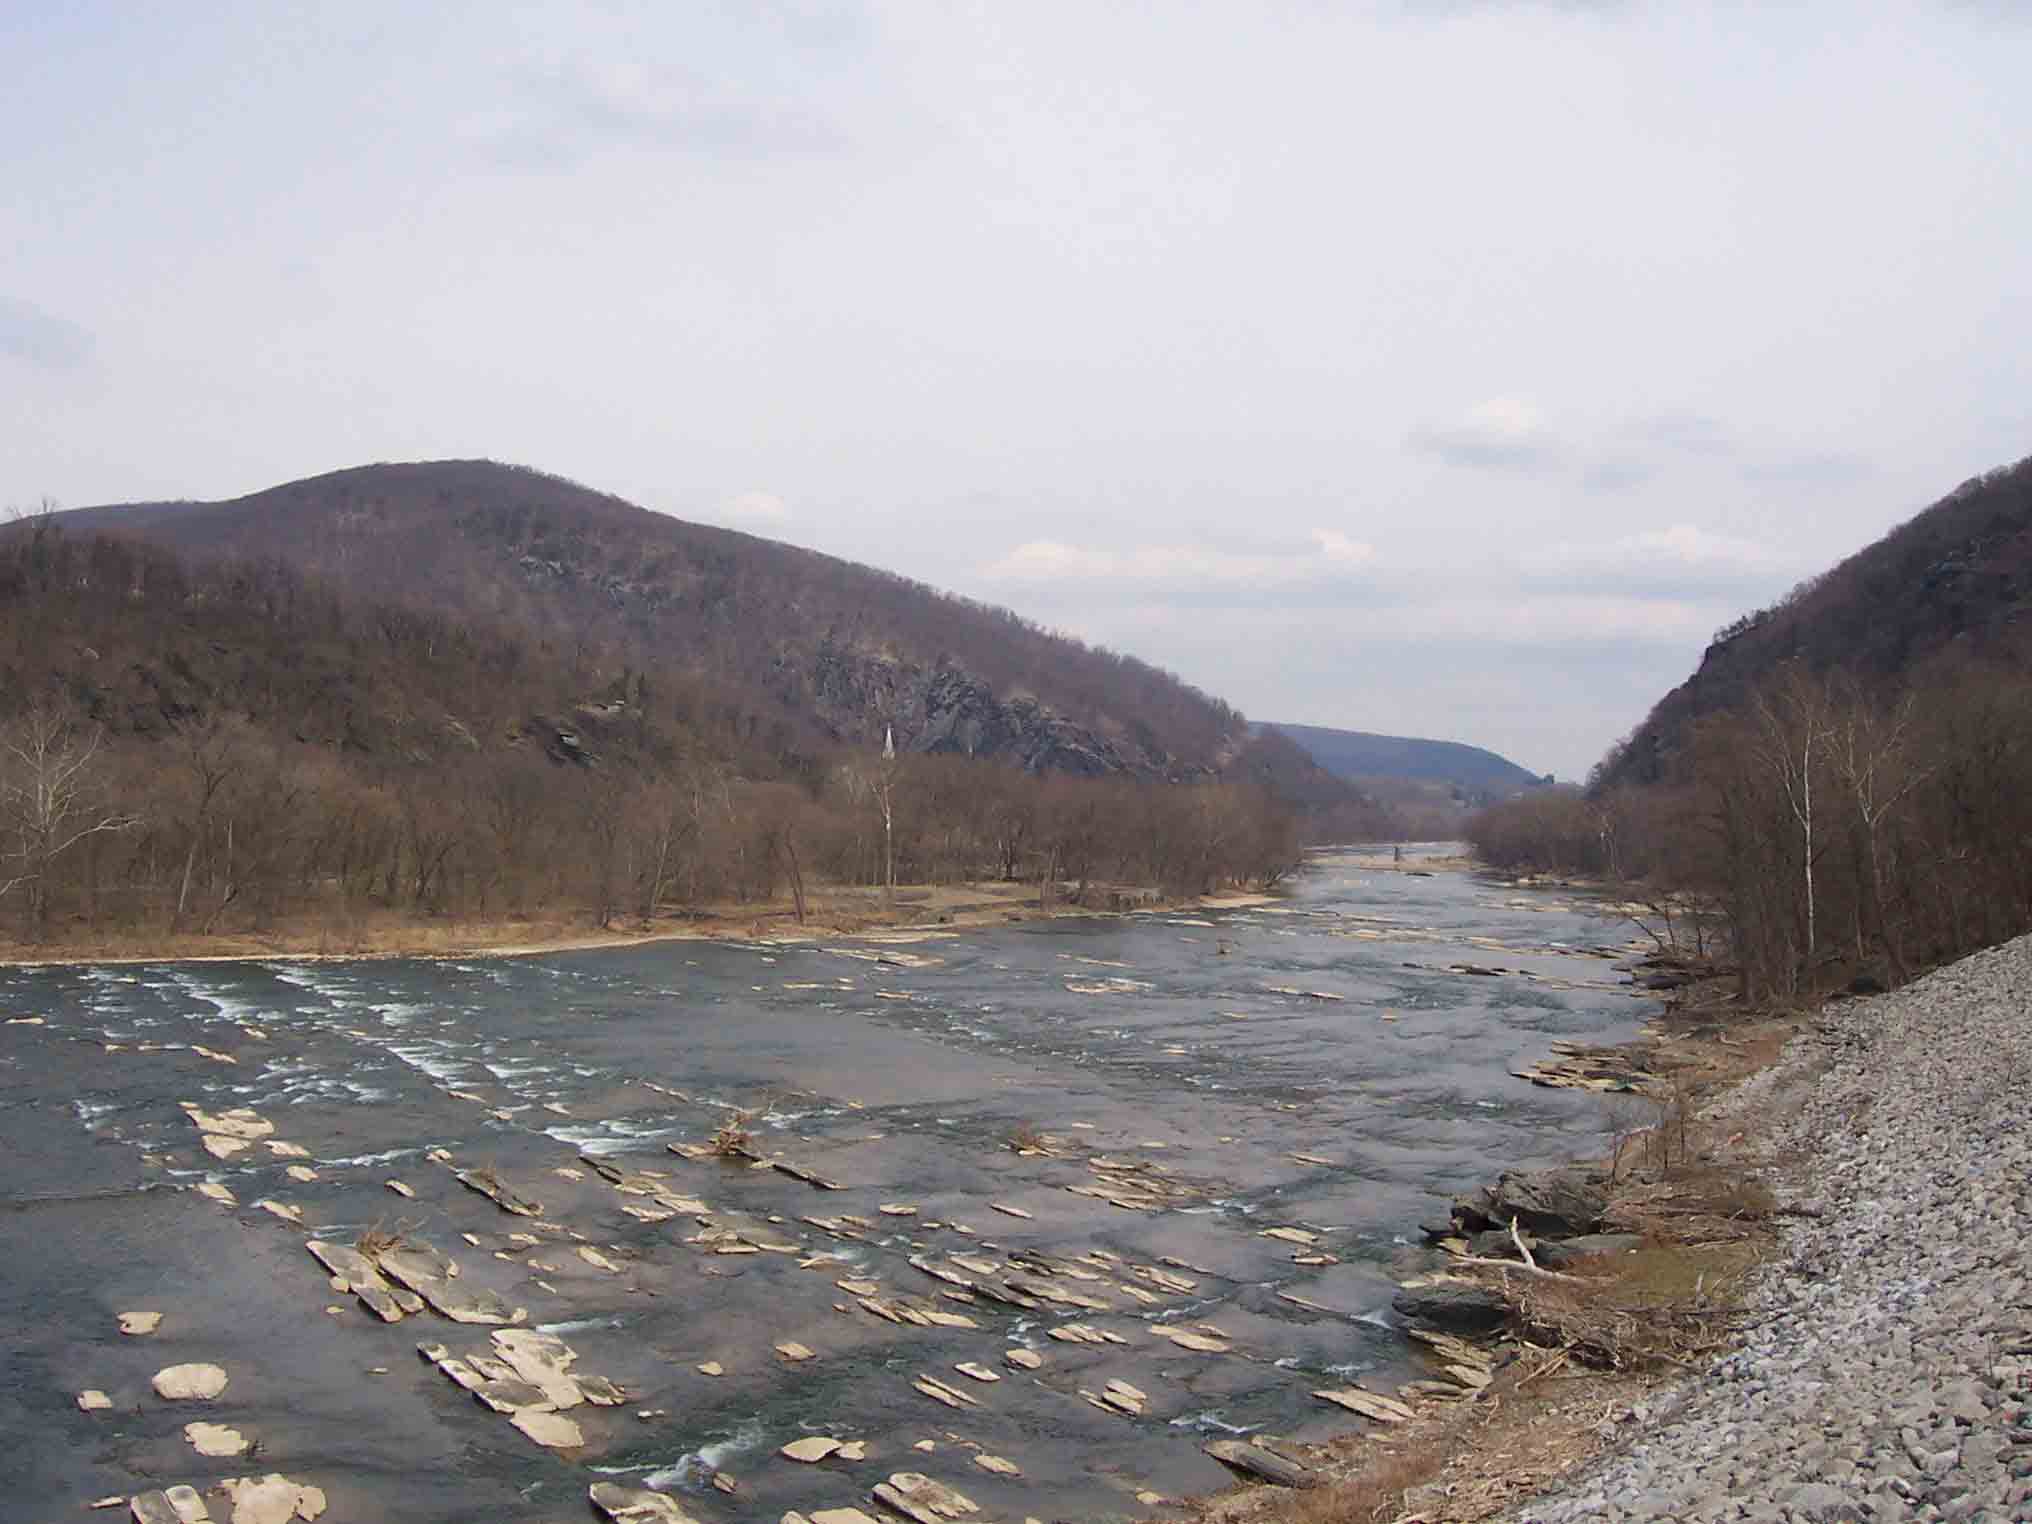 mm 1.3 - Early spring view of Shenandoah River at Harpers Ferry.  Courtesy dlcul@conncoll.edu